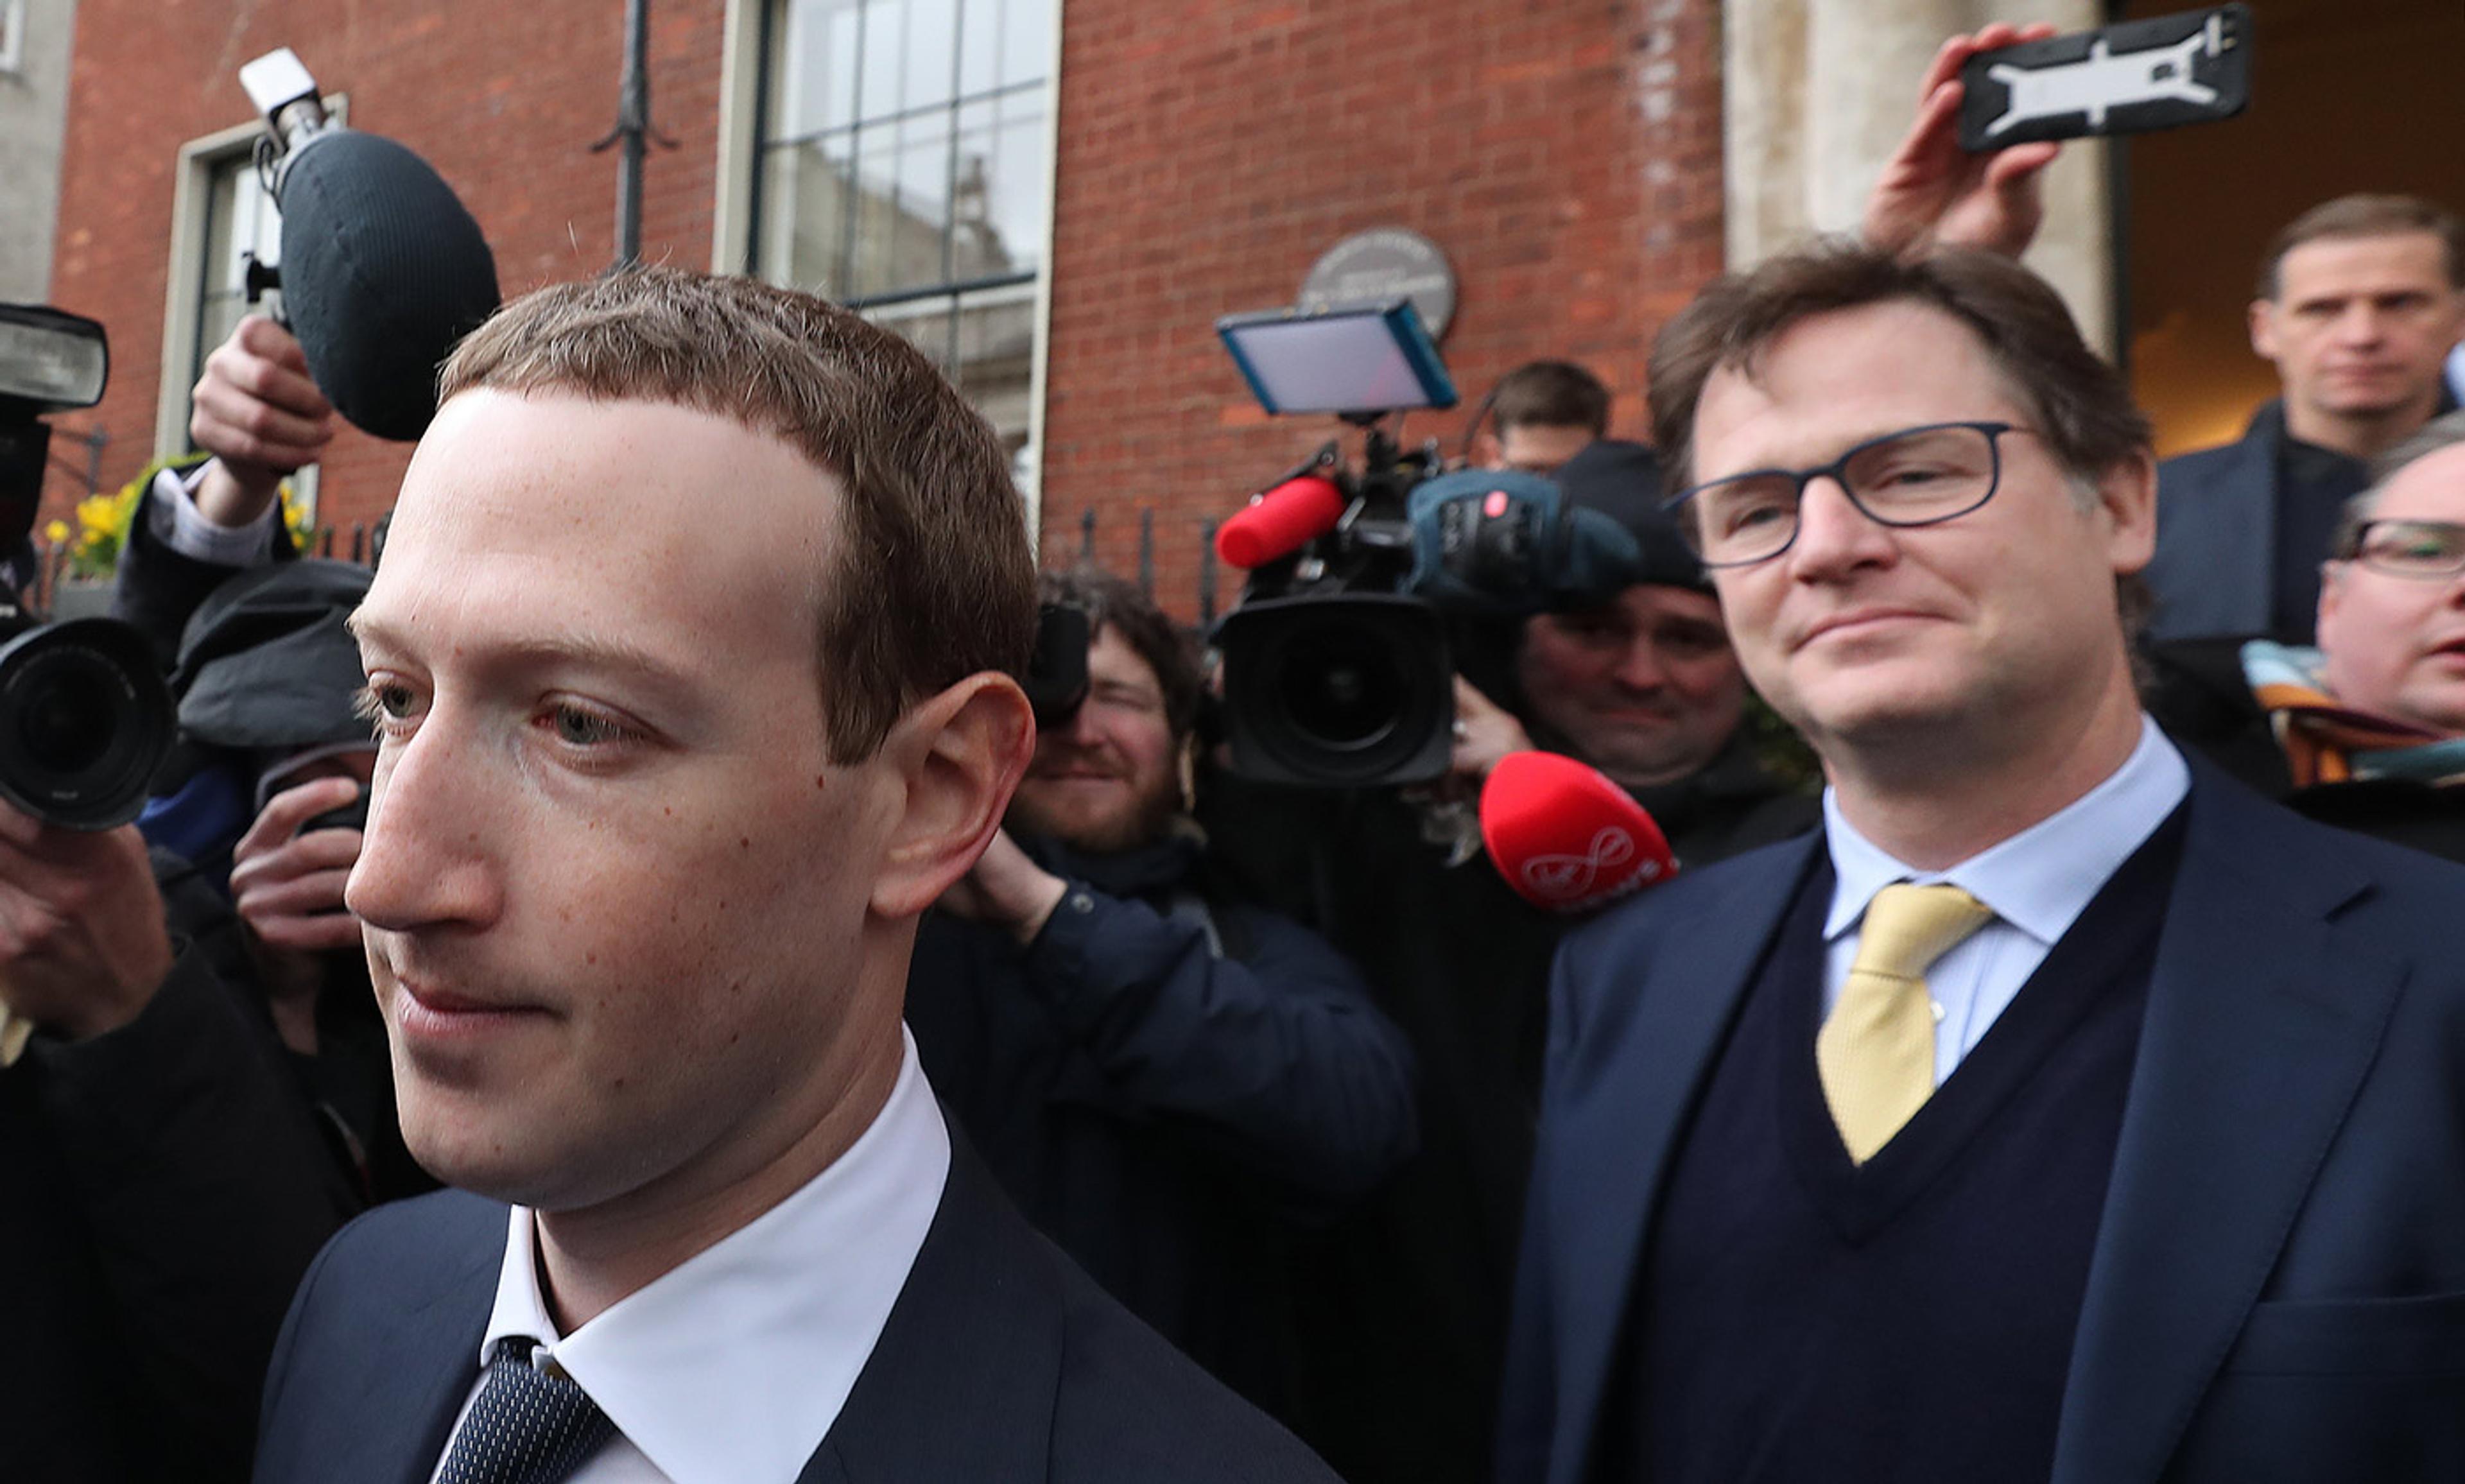 <p>Nick Clegg, former British deputy prime minister and Facebook’s new vice president of global affairs and communication, stands behind Facebook CEO Mark Zuckerberg. <em>Photo by Niall Carson/PA/Getty</em></p>